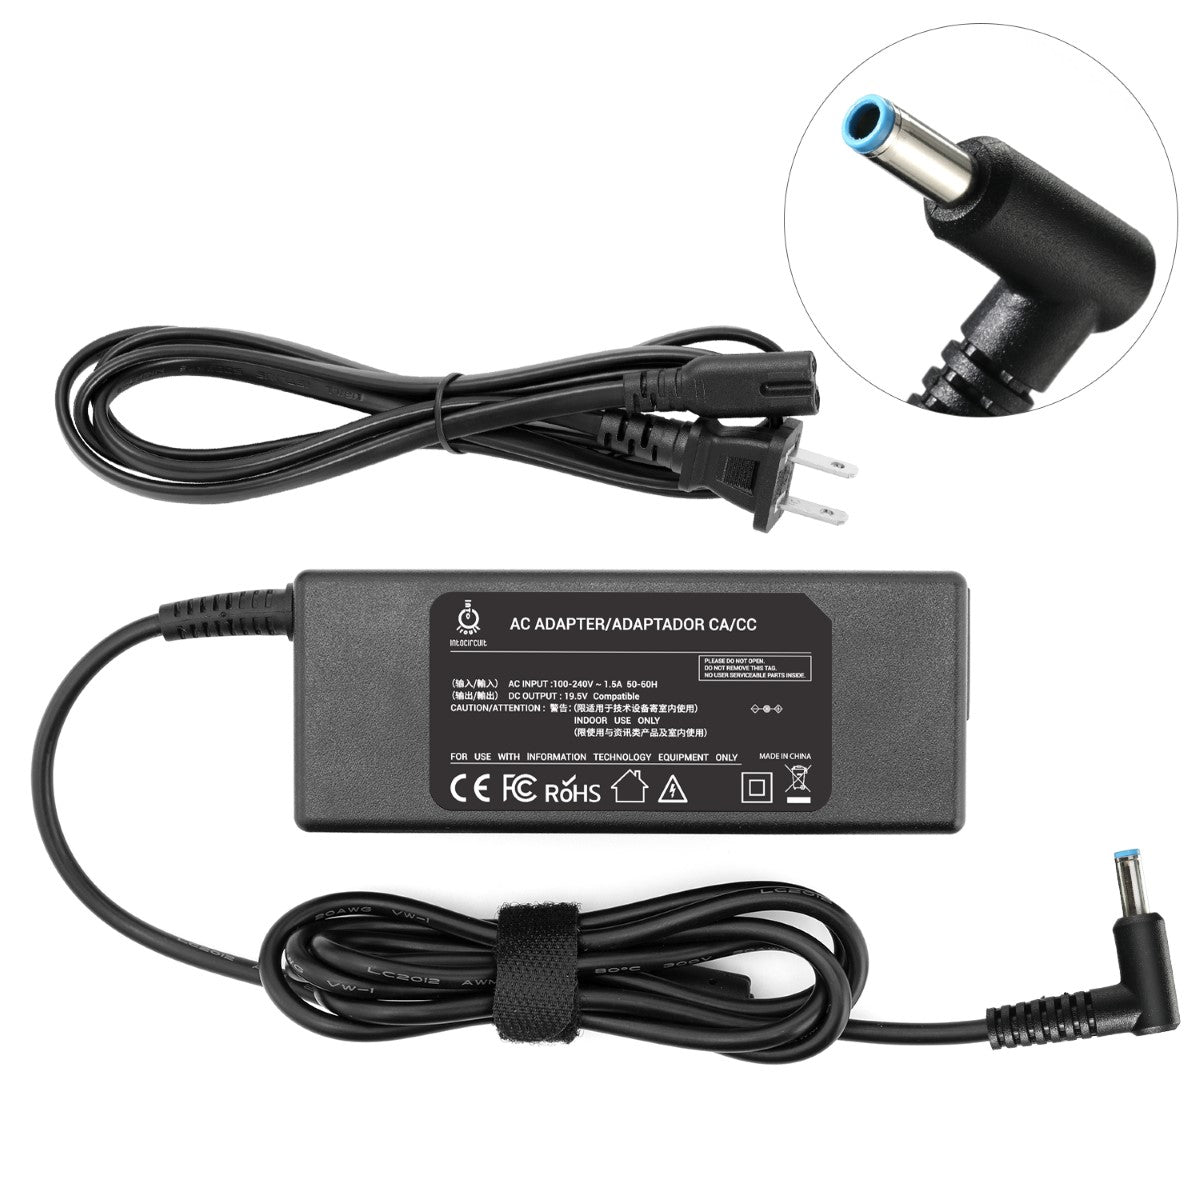 Charger for HP ENVY 15m-ed0023dx x360 Convertible Laptop